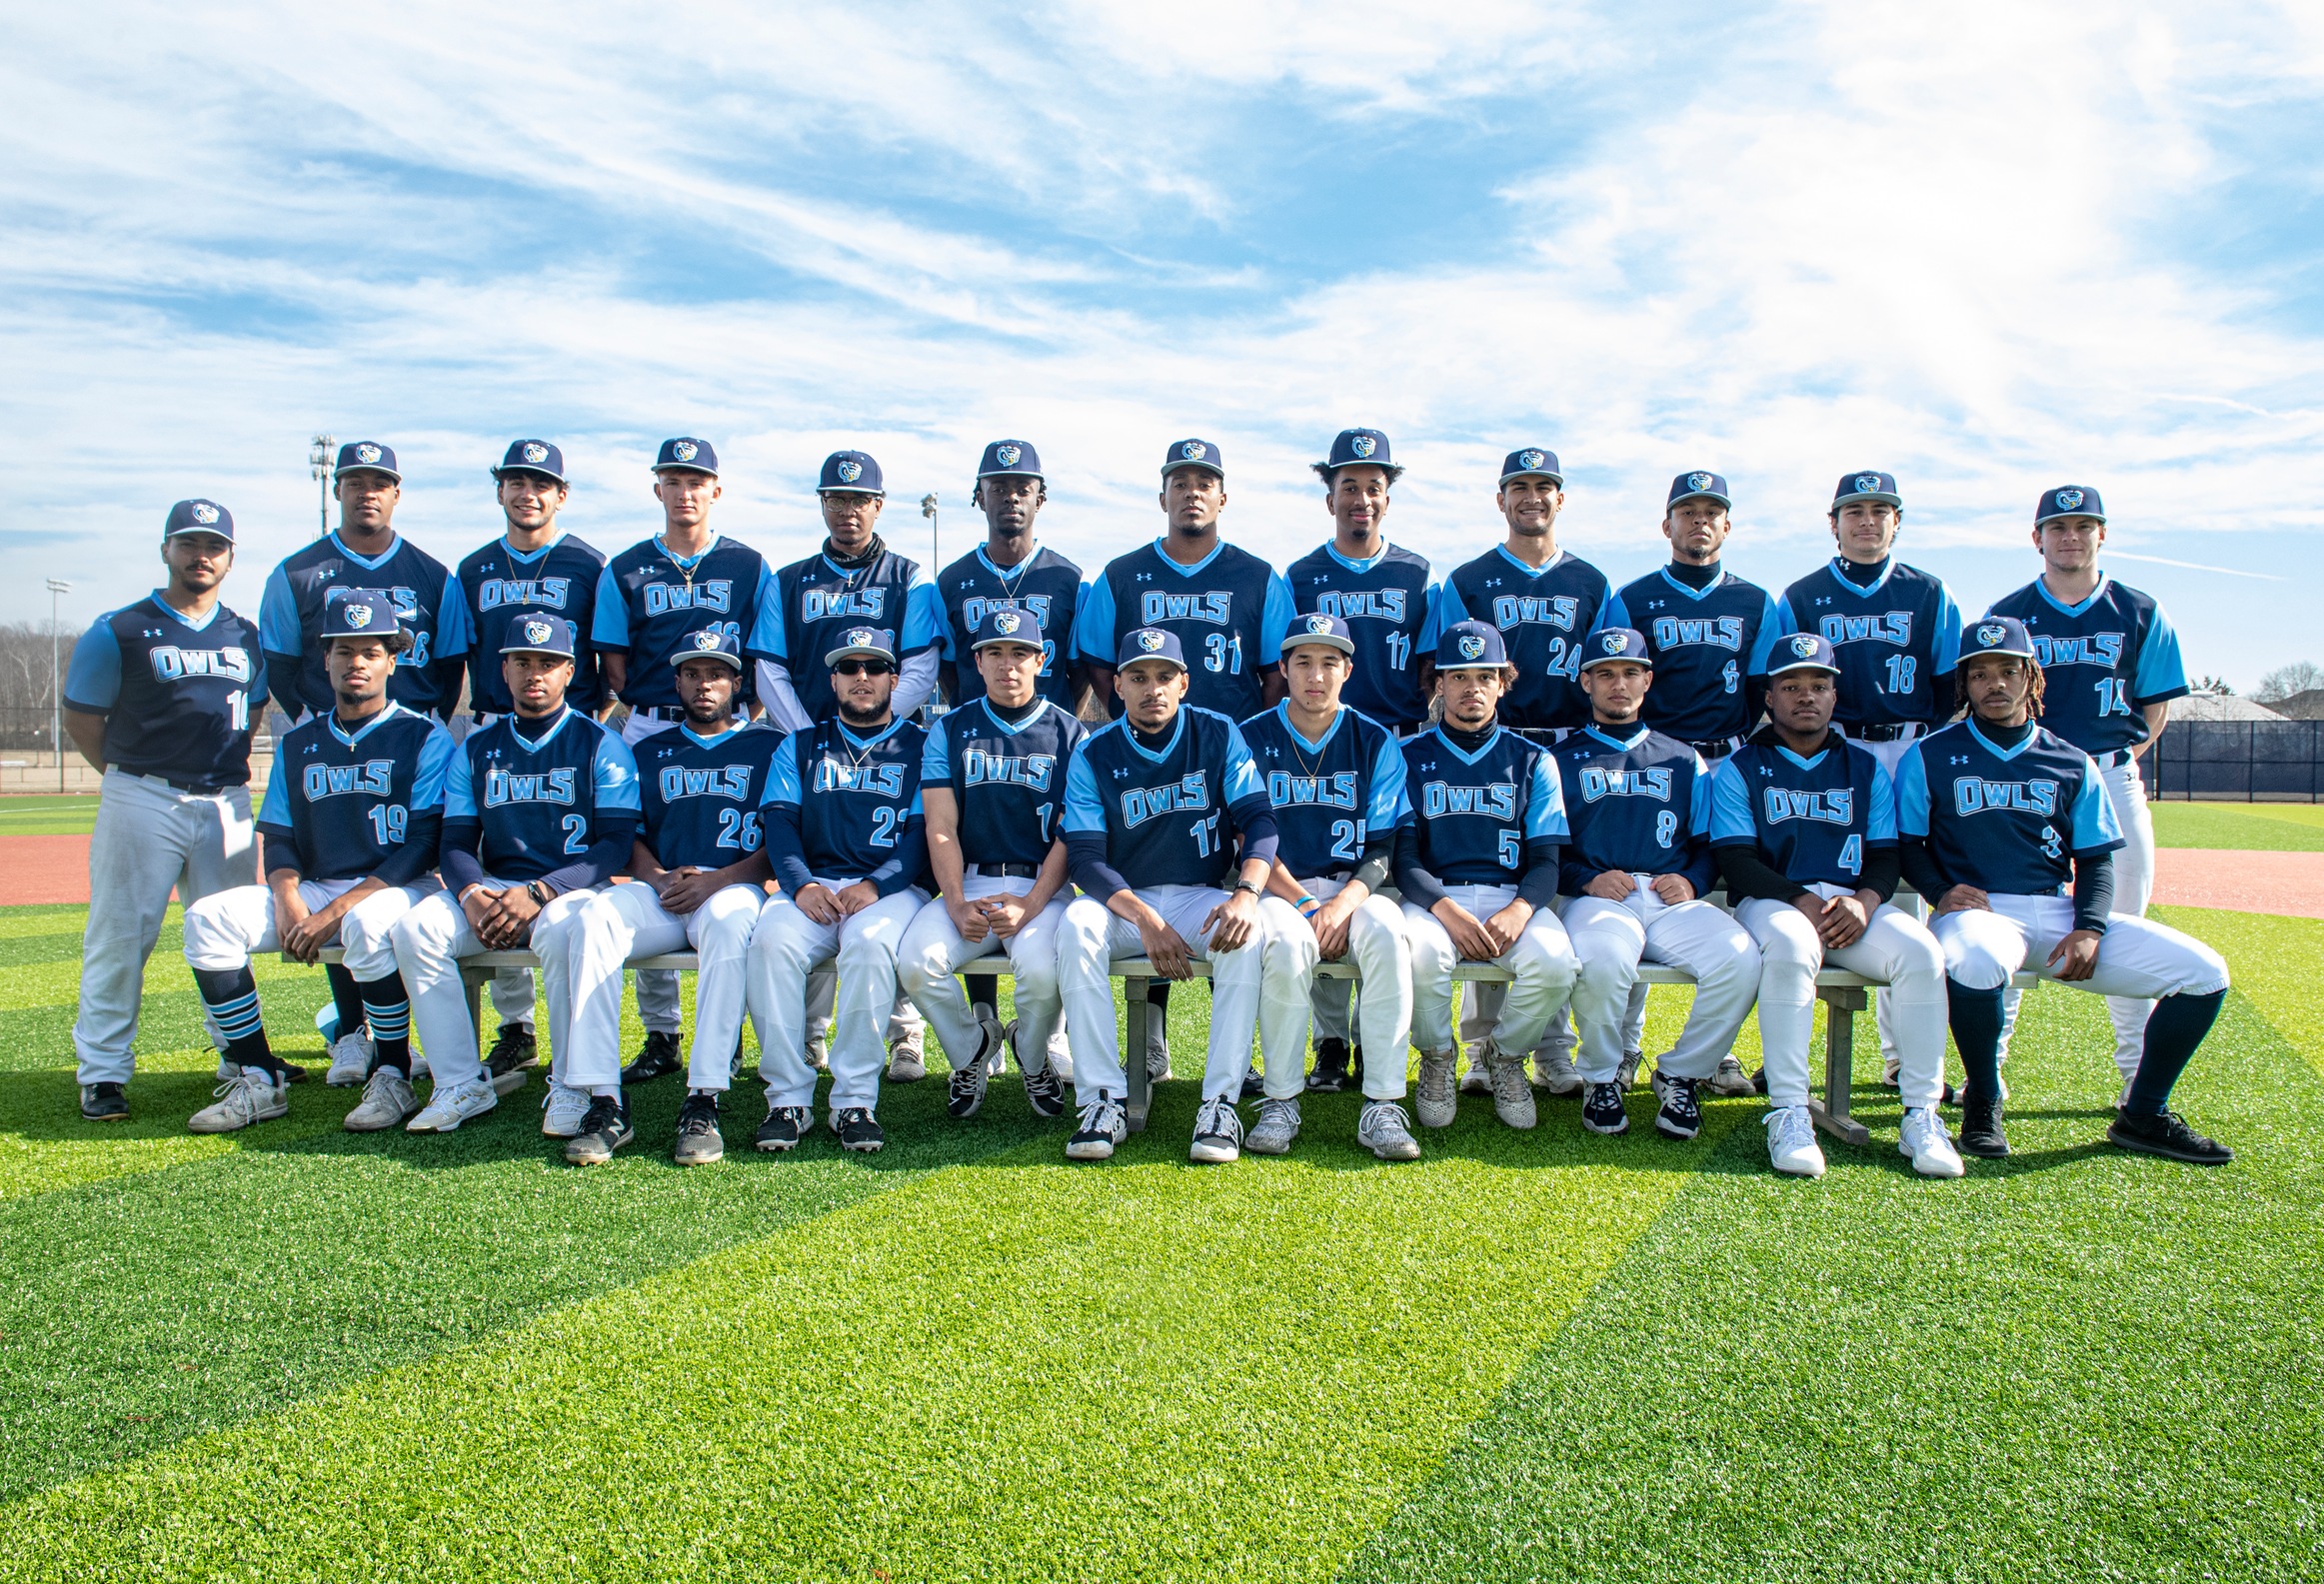 Owls Baseball Enters Region 20 Tournament As Top Seed